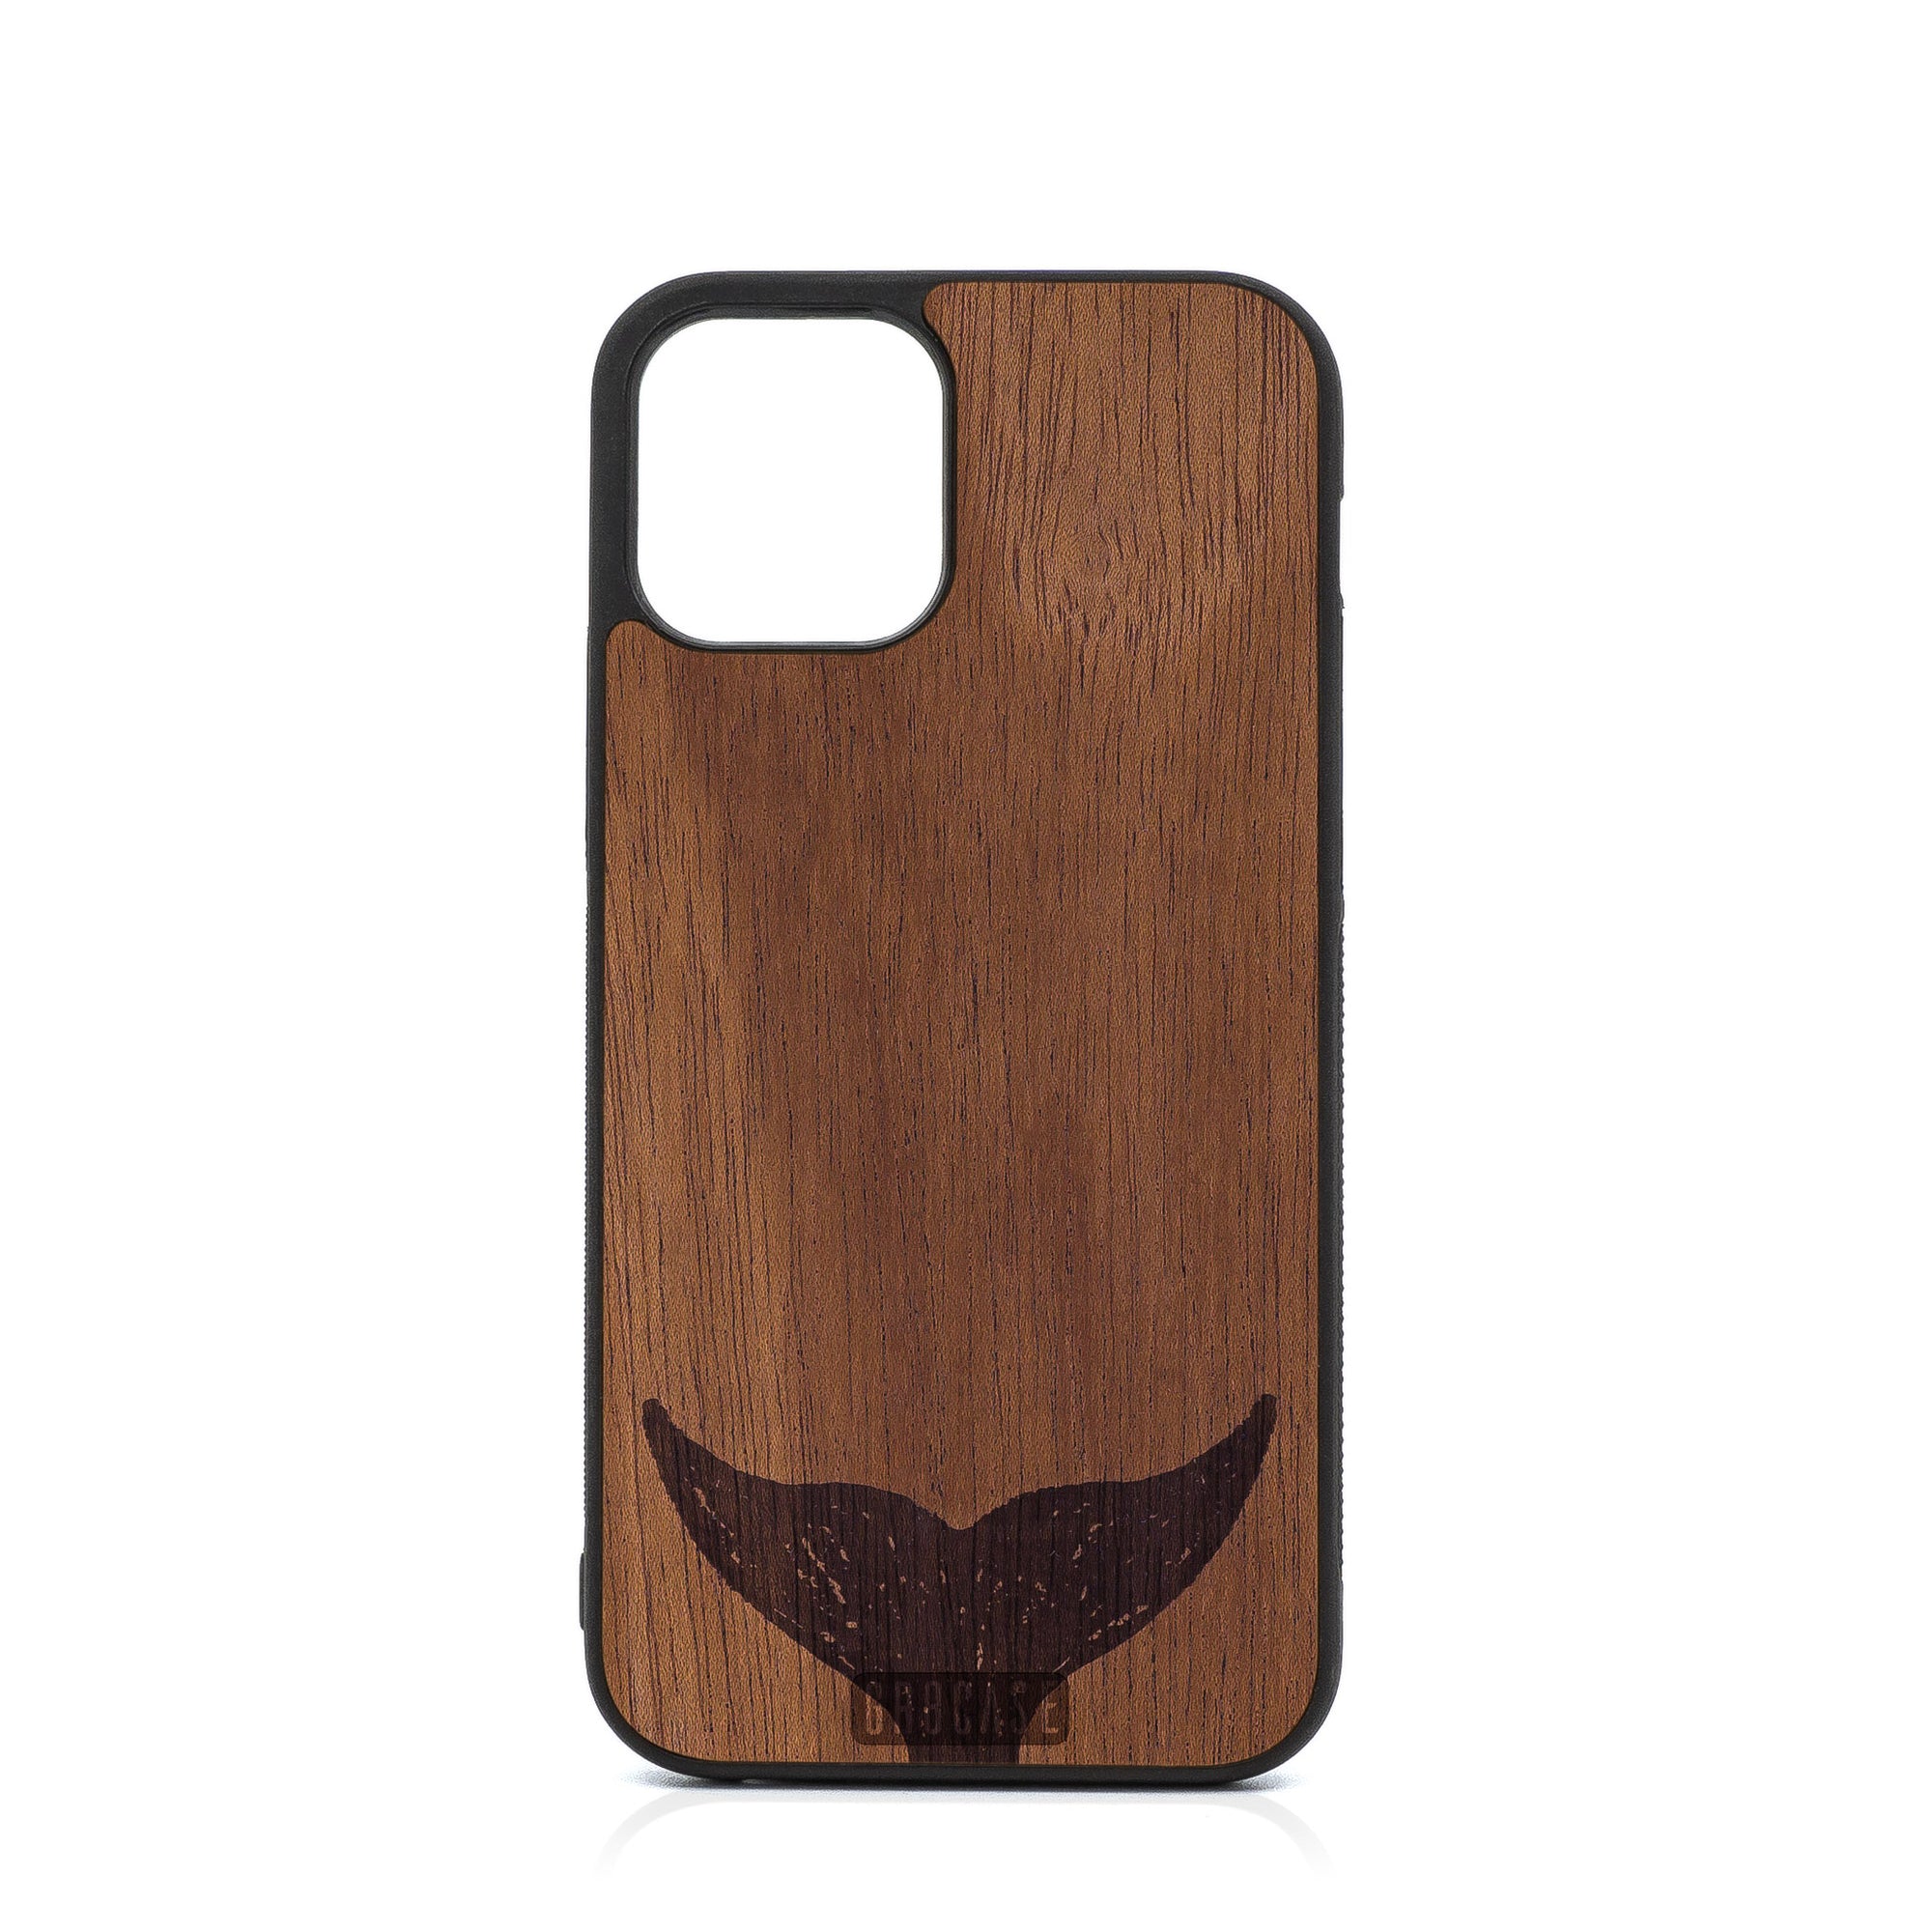 Whale Tail Design Wood Case For iPhone 12 Pro